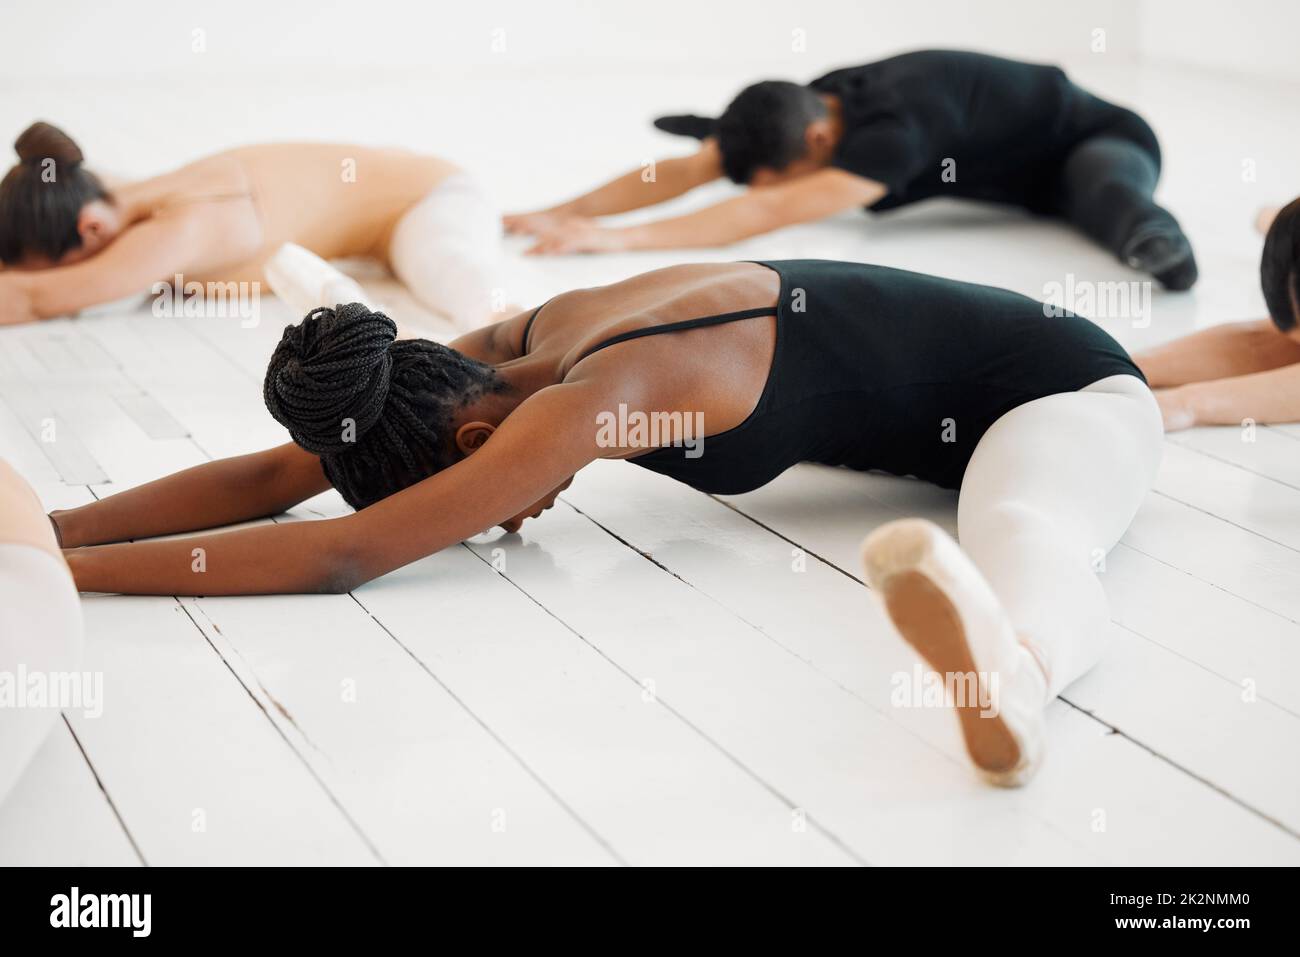 His or her body will be the music. Shot of a young group of ballerinas stretching in a dance studio. Stock Photo